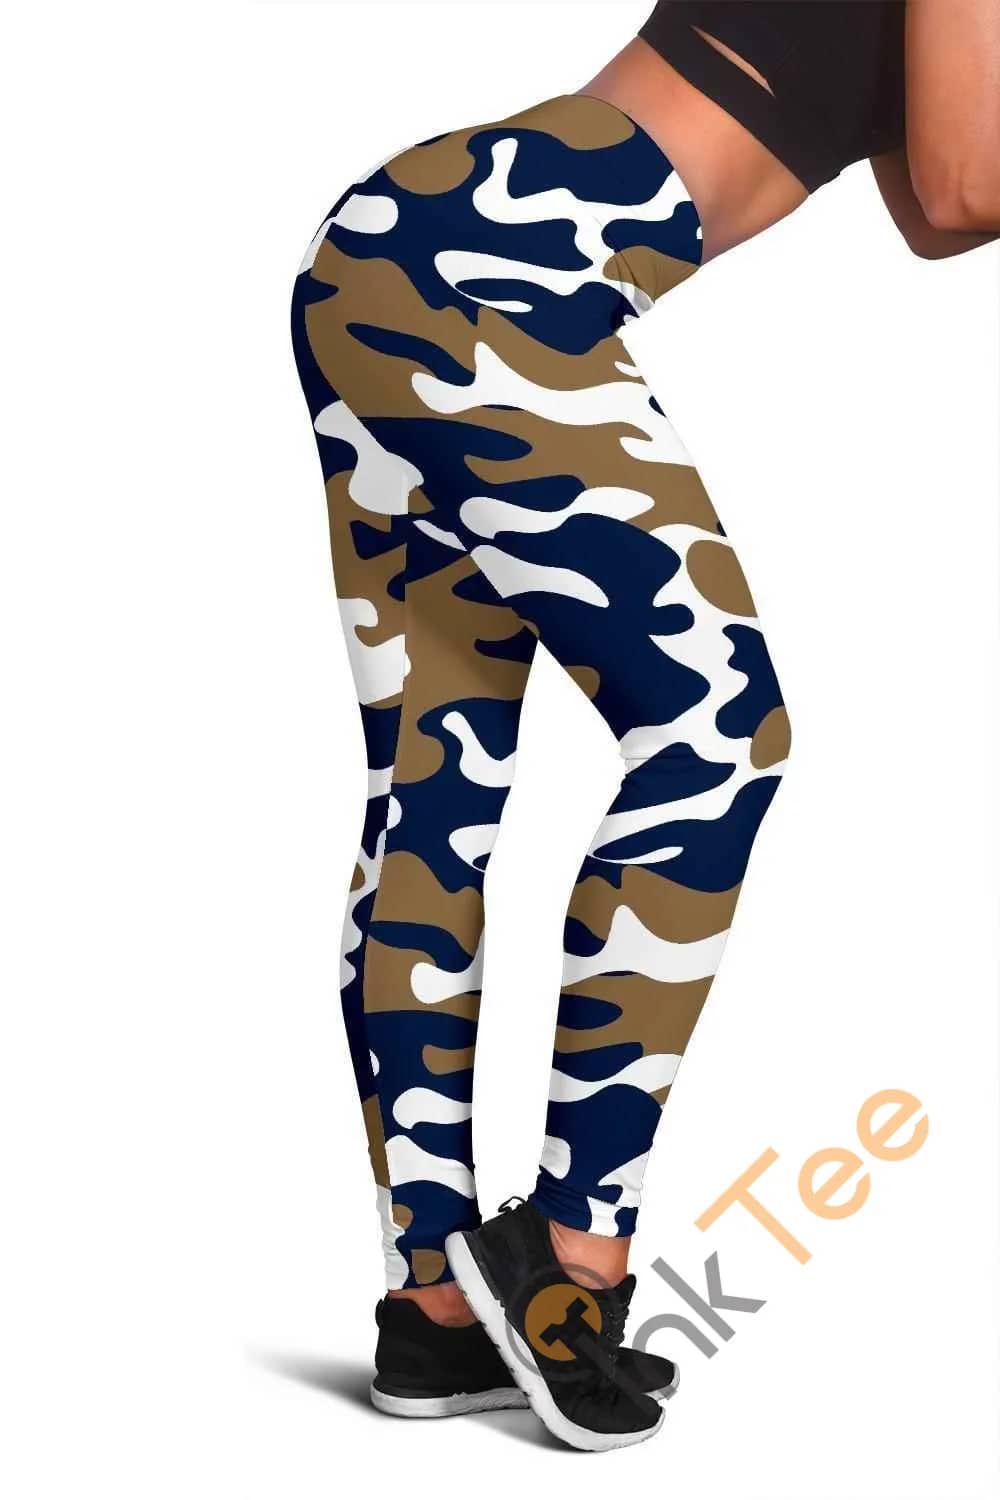 Los Angeles Rams Inspired Tru Camo 3D All Over Print For Yoga Fitness Fashion Women's Leggings